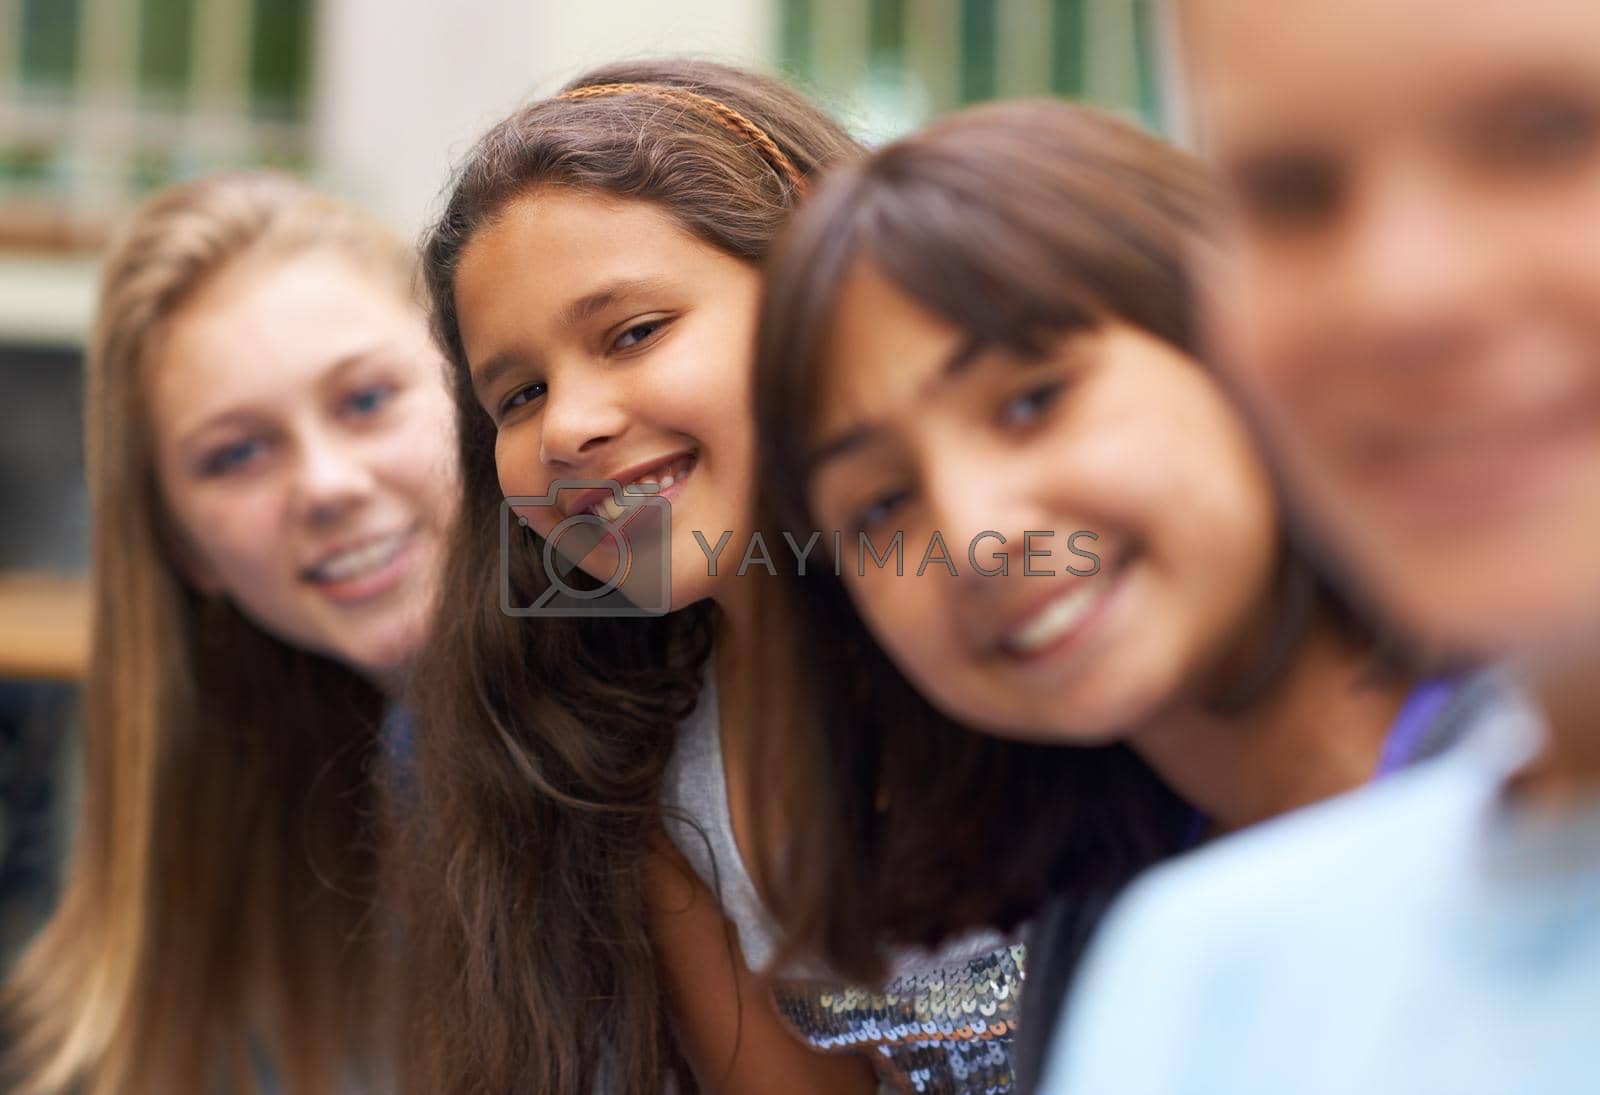 Royalty free image of Friendship and smiles. Portrait of a young girl standing amongst her school friends. by YuriArcurs